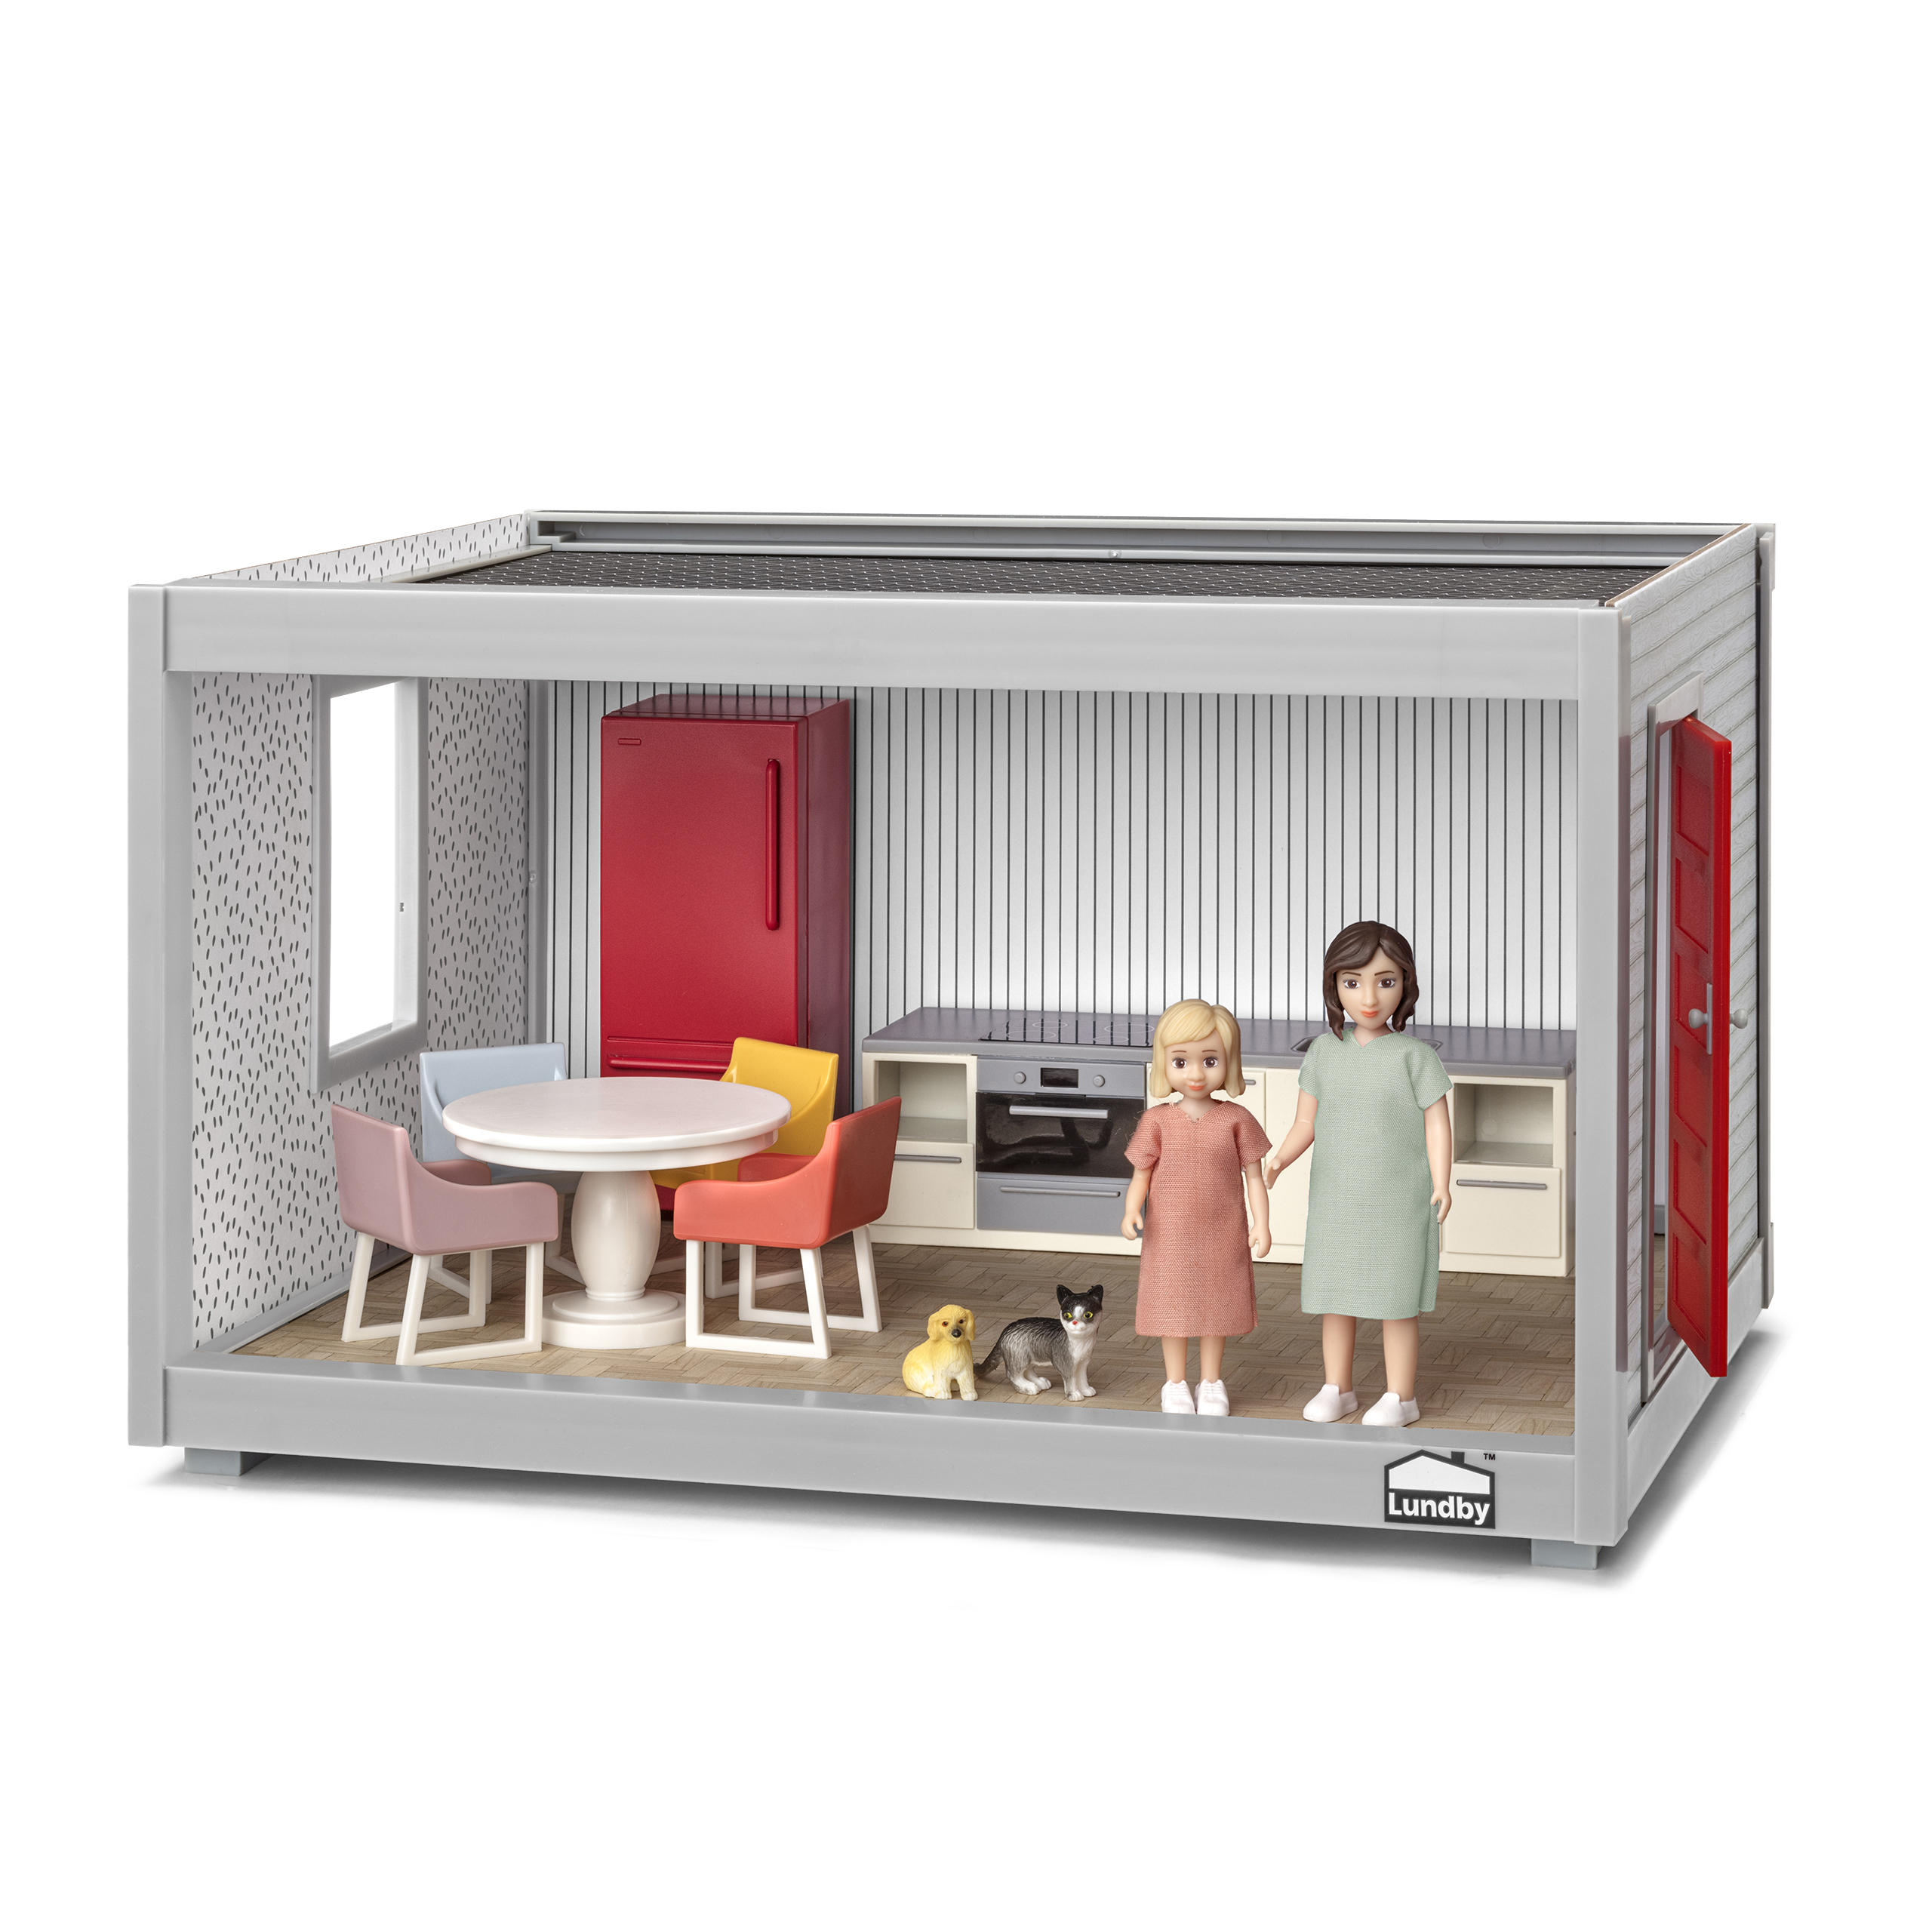 Lundby lundby doll house starter pack small